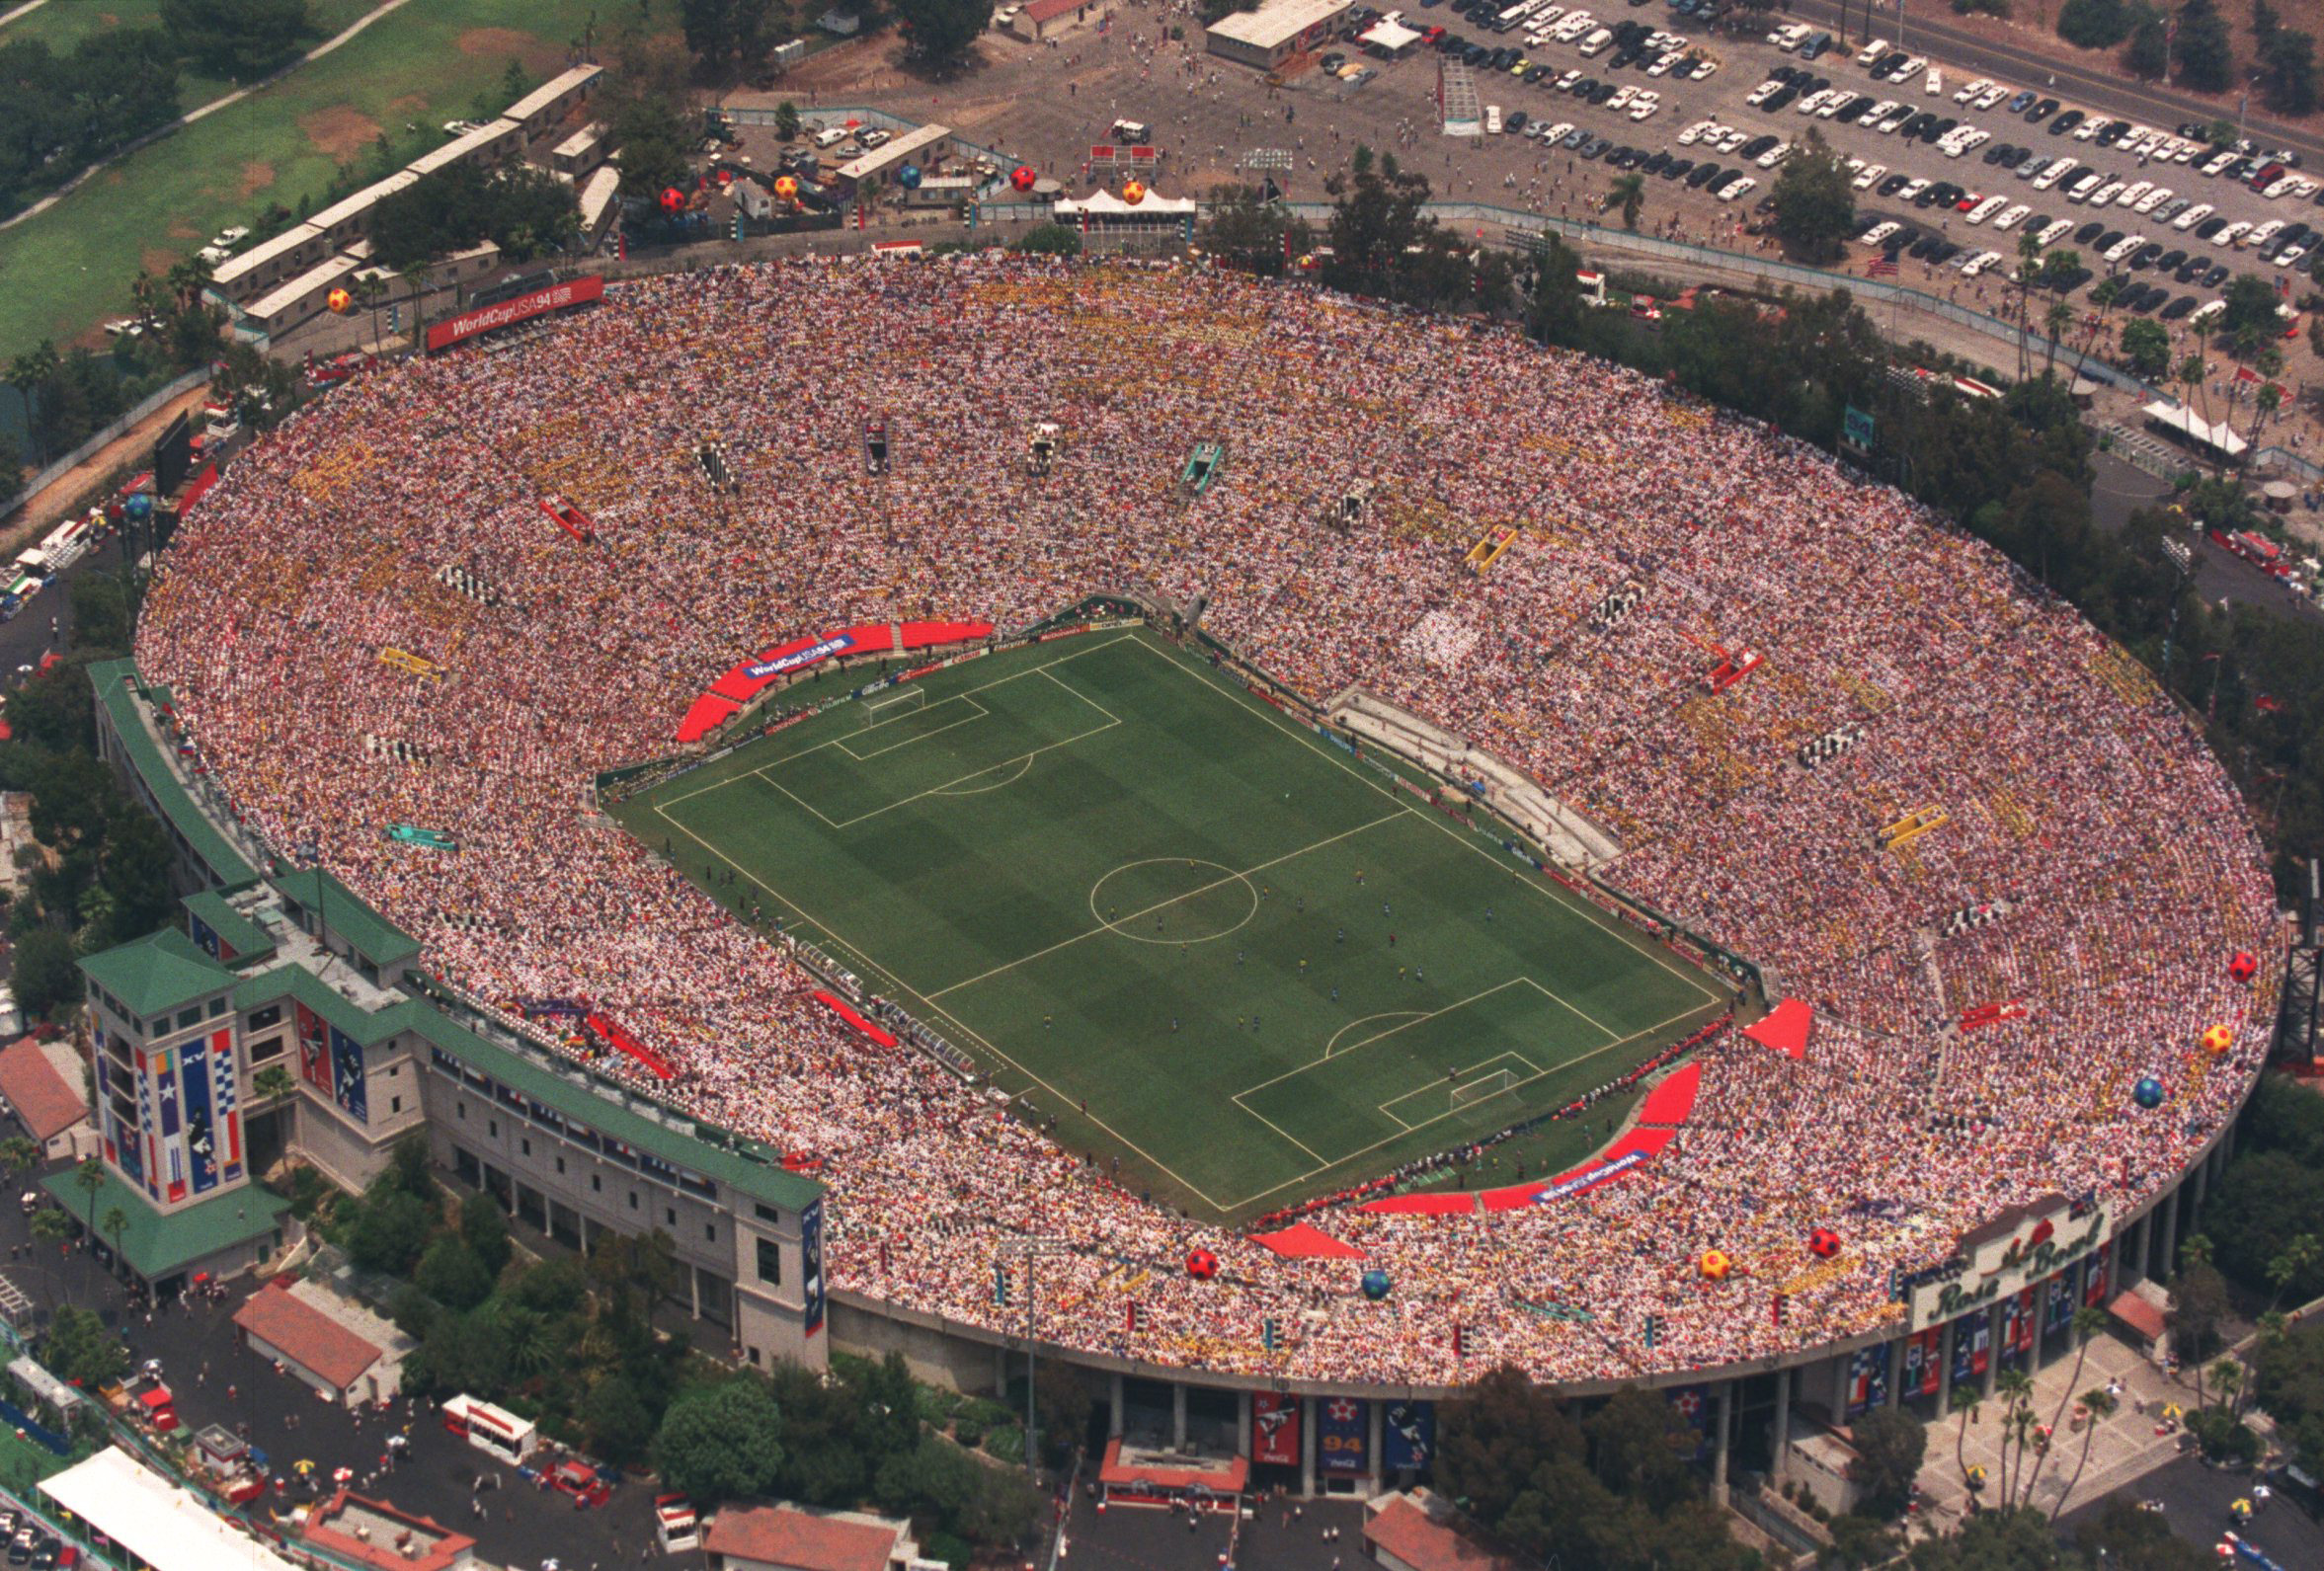 PHOTO: A aerial view of the Rose Bowl in Pasadena, Calif. during the 1994 World Cup finale game.